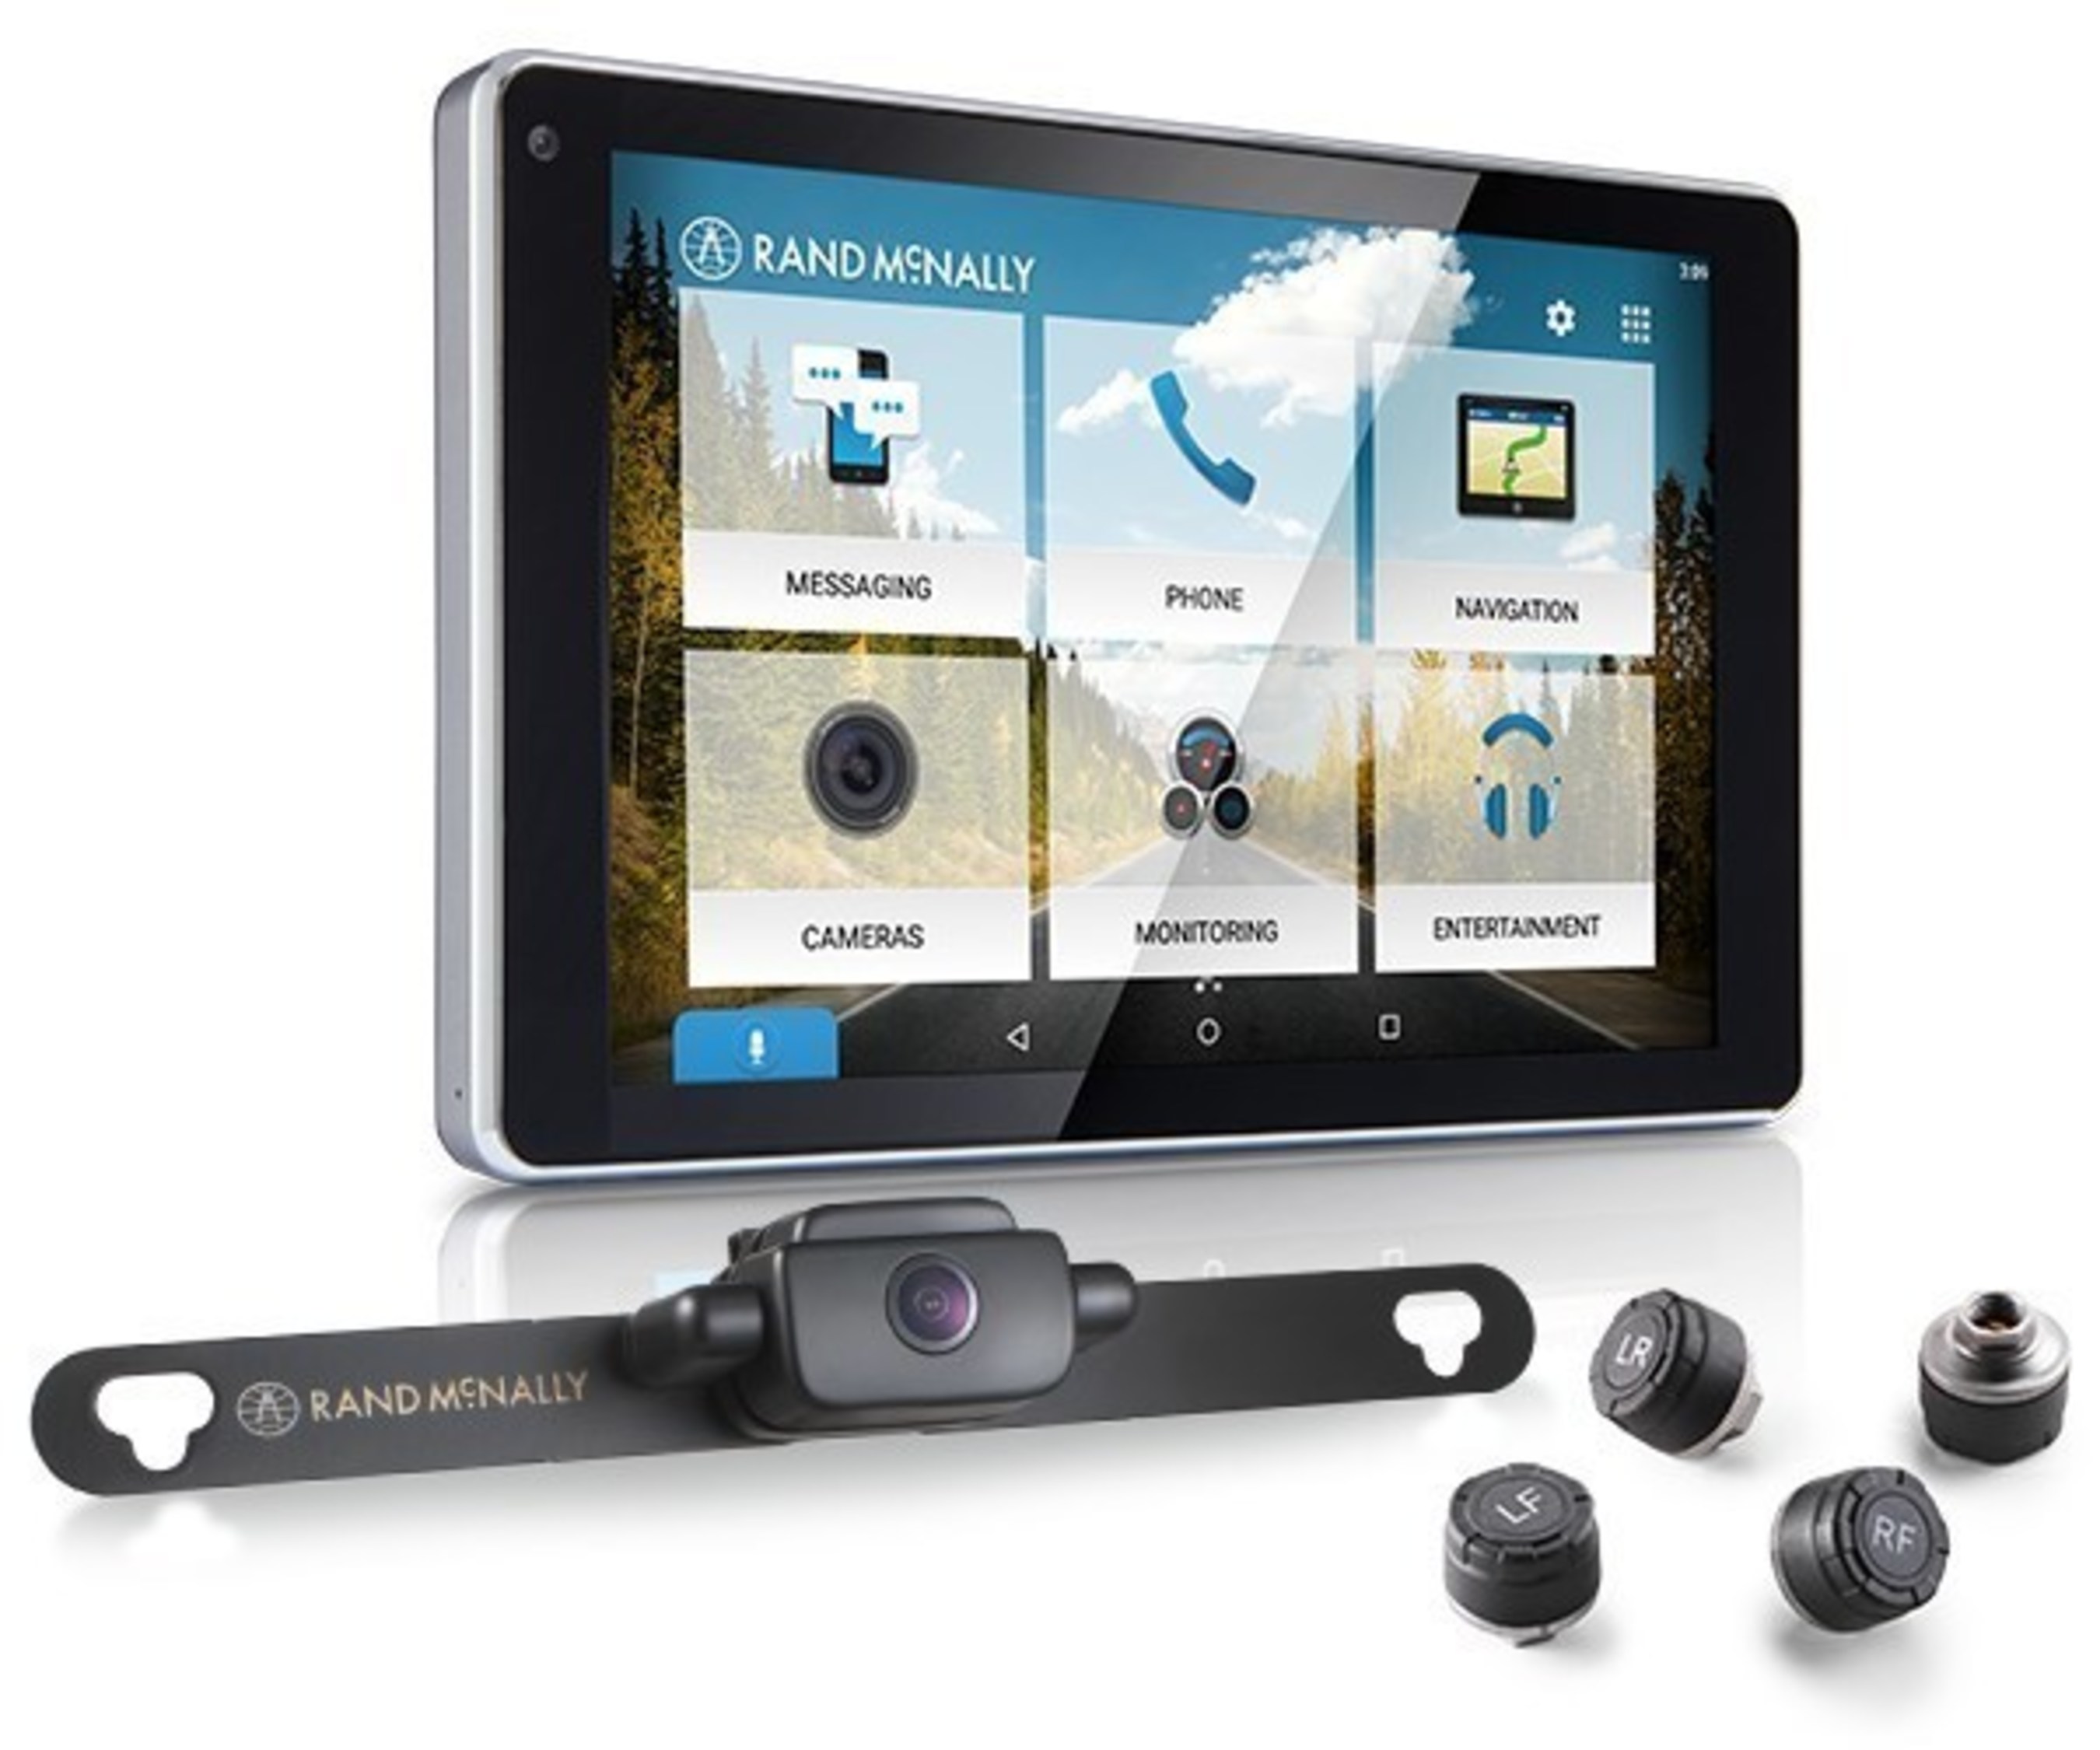 OverDryve is compatible with Rand McNally's wireless backup camera and tire pressure monitoring system.